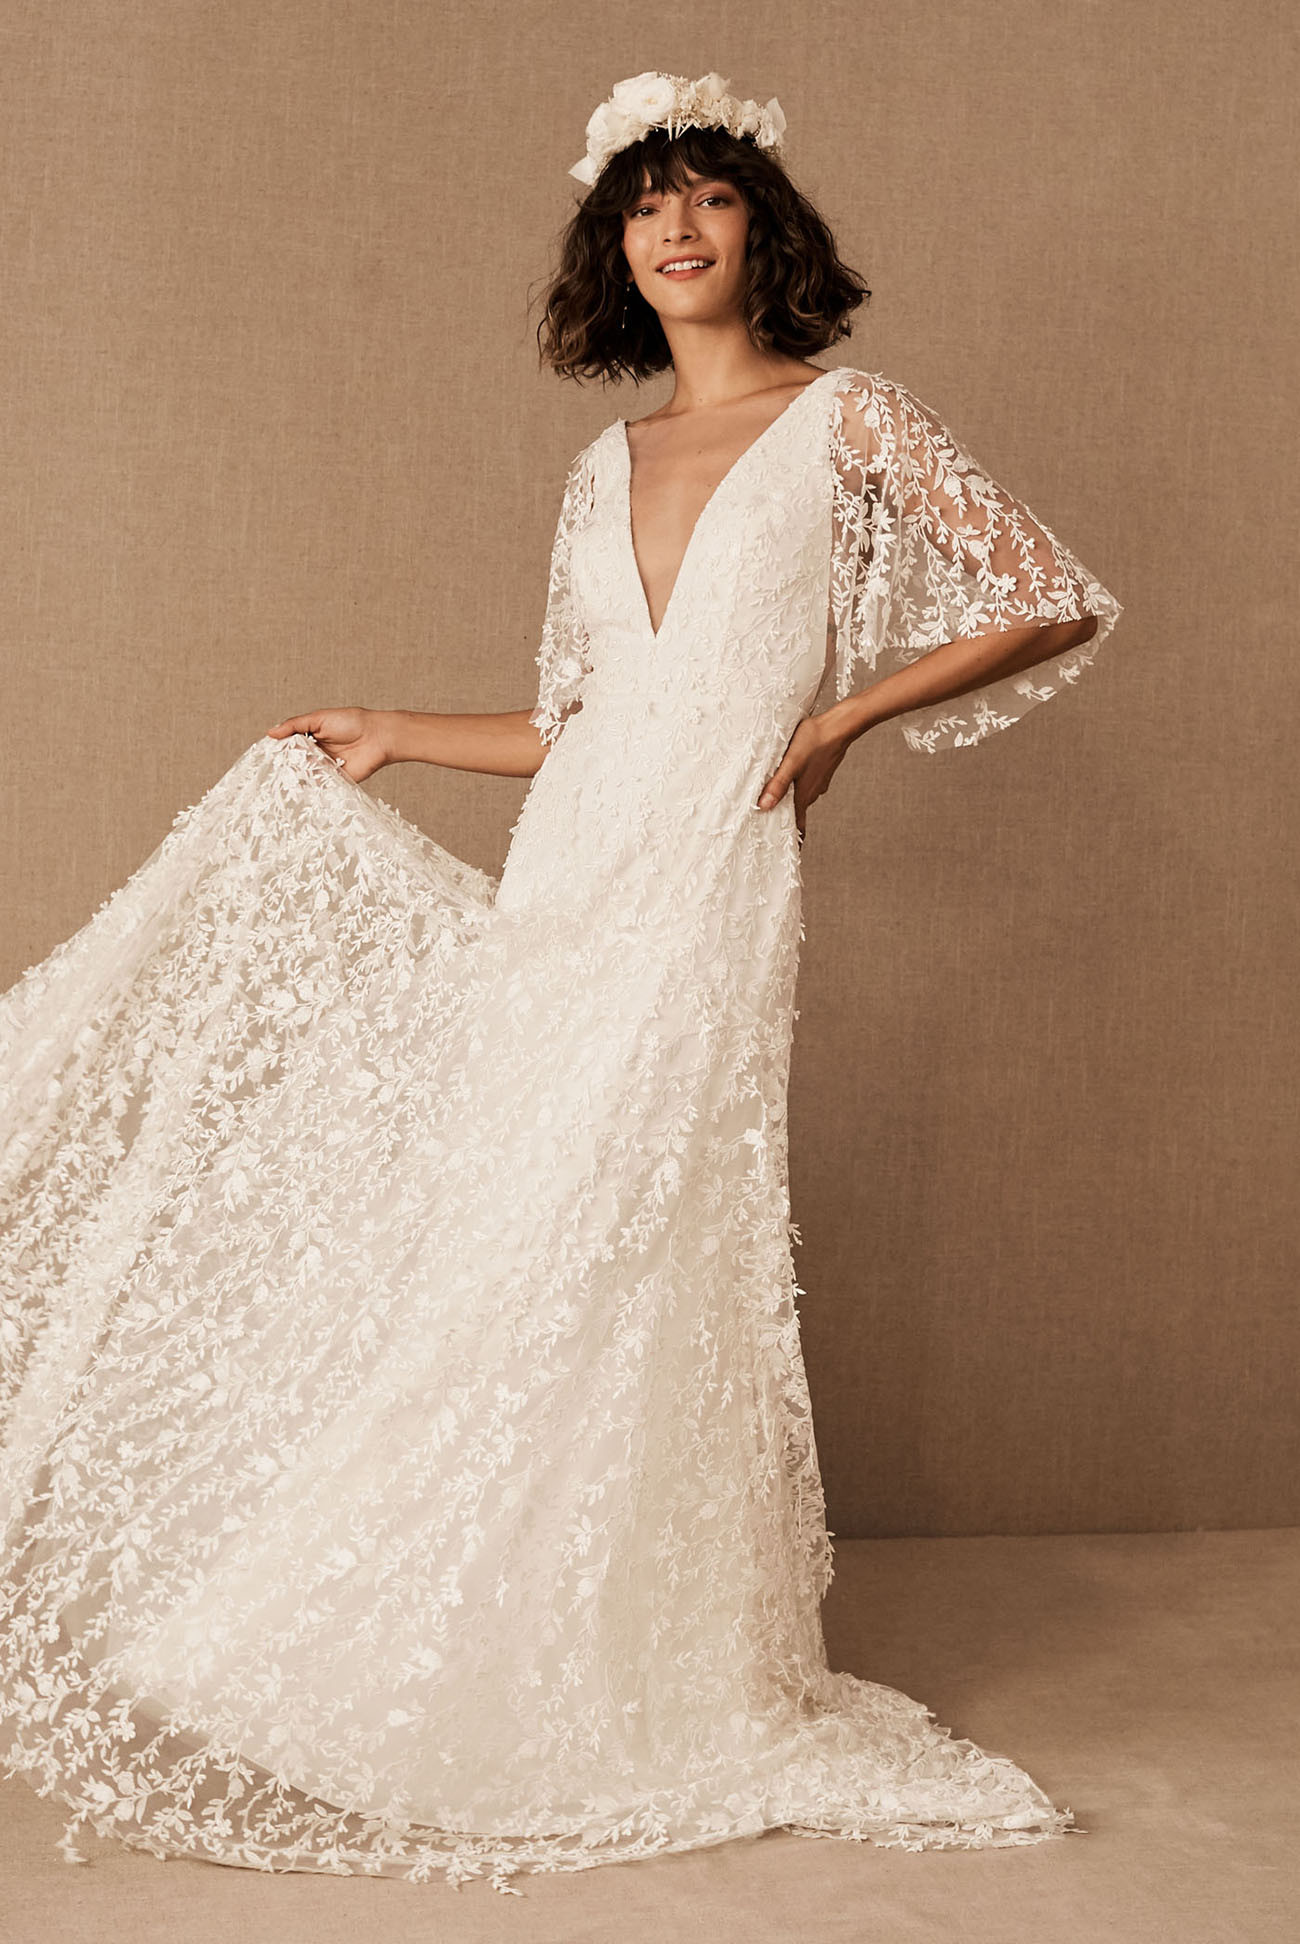 Best Wedding Shoes 2020
 Exclusive Preview Alert BHLDN s Spring 2020 Gowns are